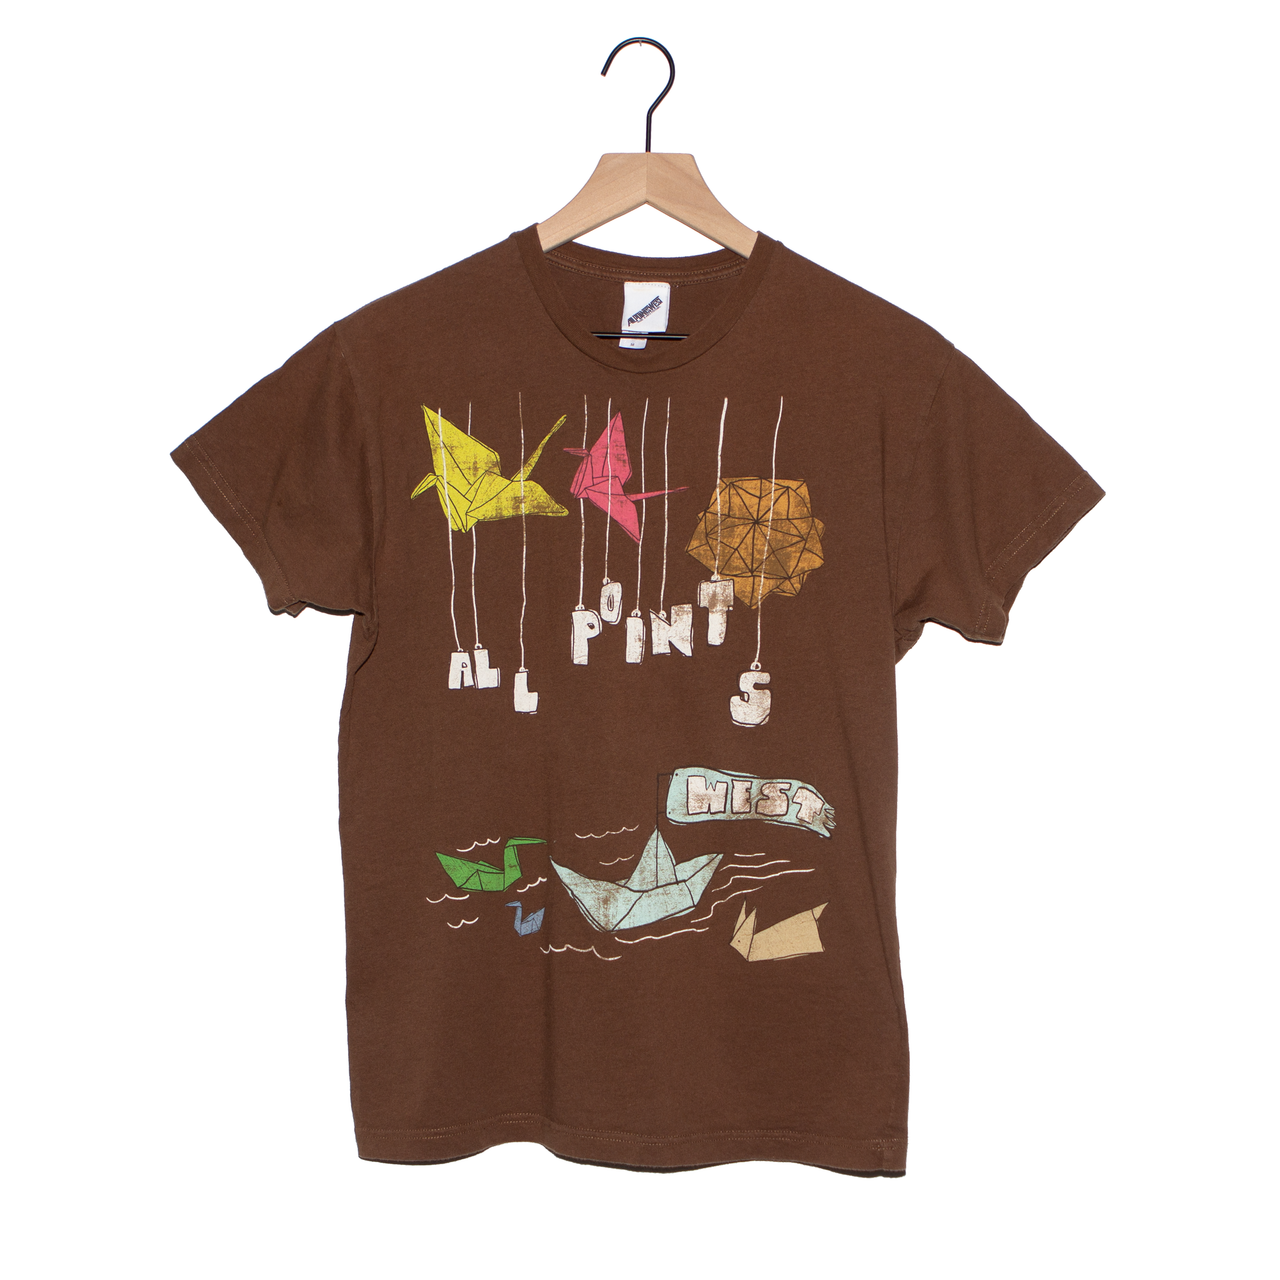 All Points West Shirt